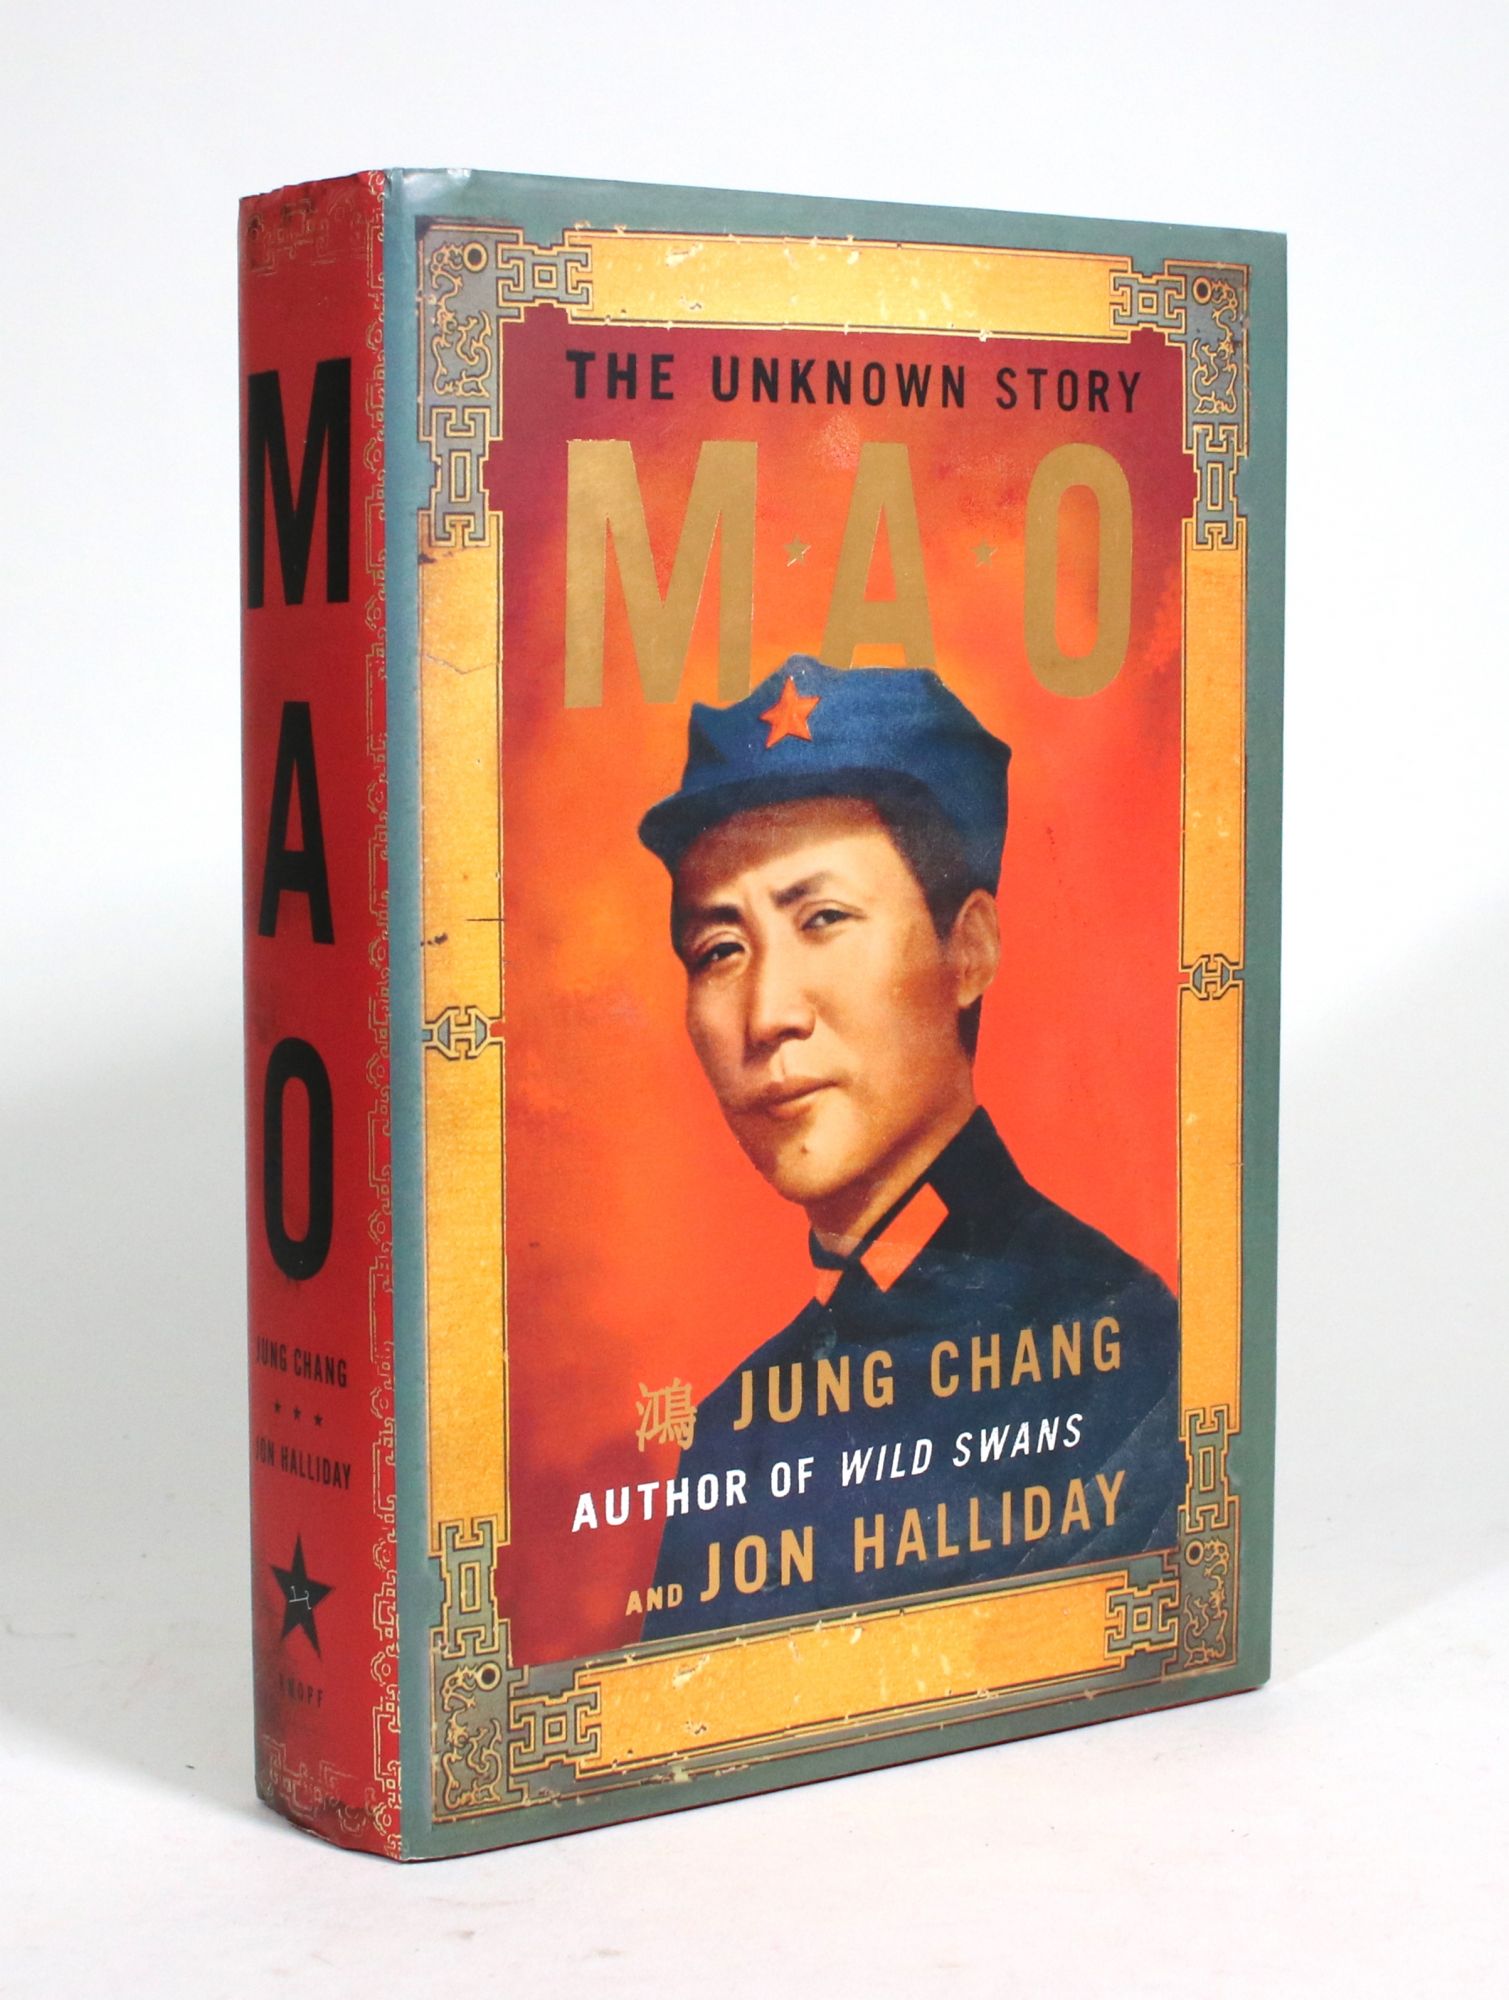 ILAB　Unknown　Fine　Halliday:　Edition.　Hardcover　The　1st　by　(2005)　Chang,　Mao:　Jung　Jon　and　Story　ABAC　Minotavros　Books,